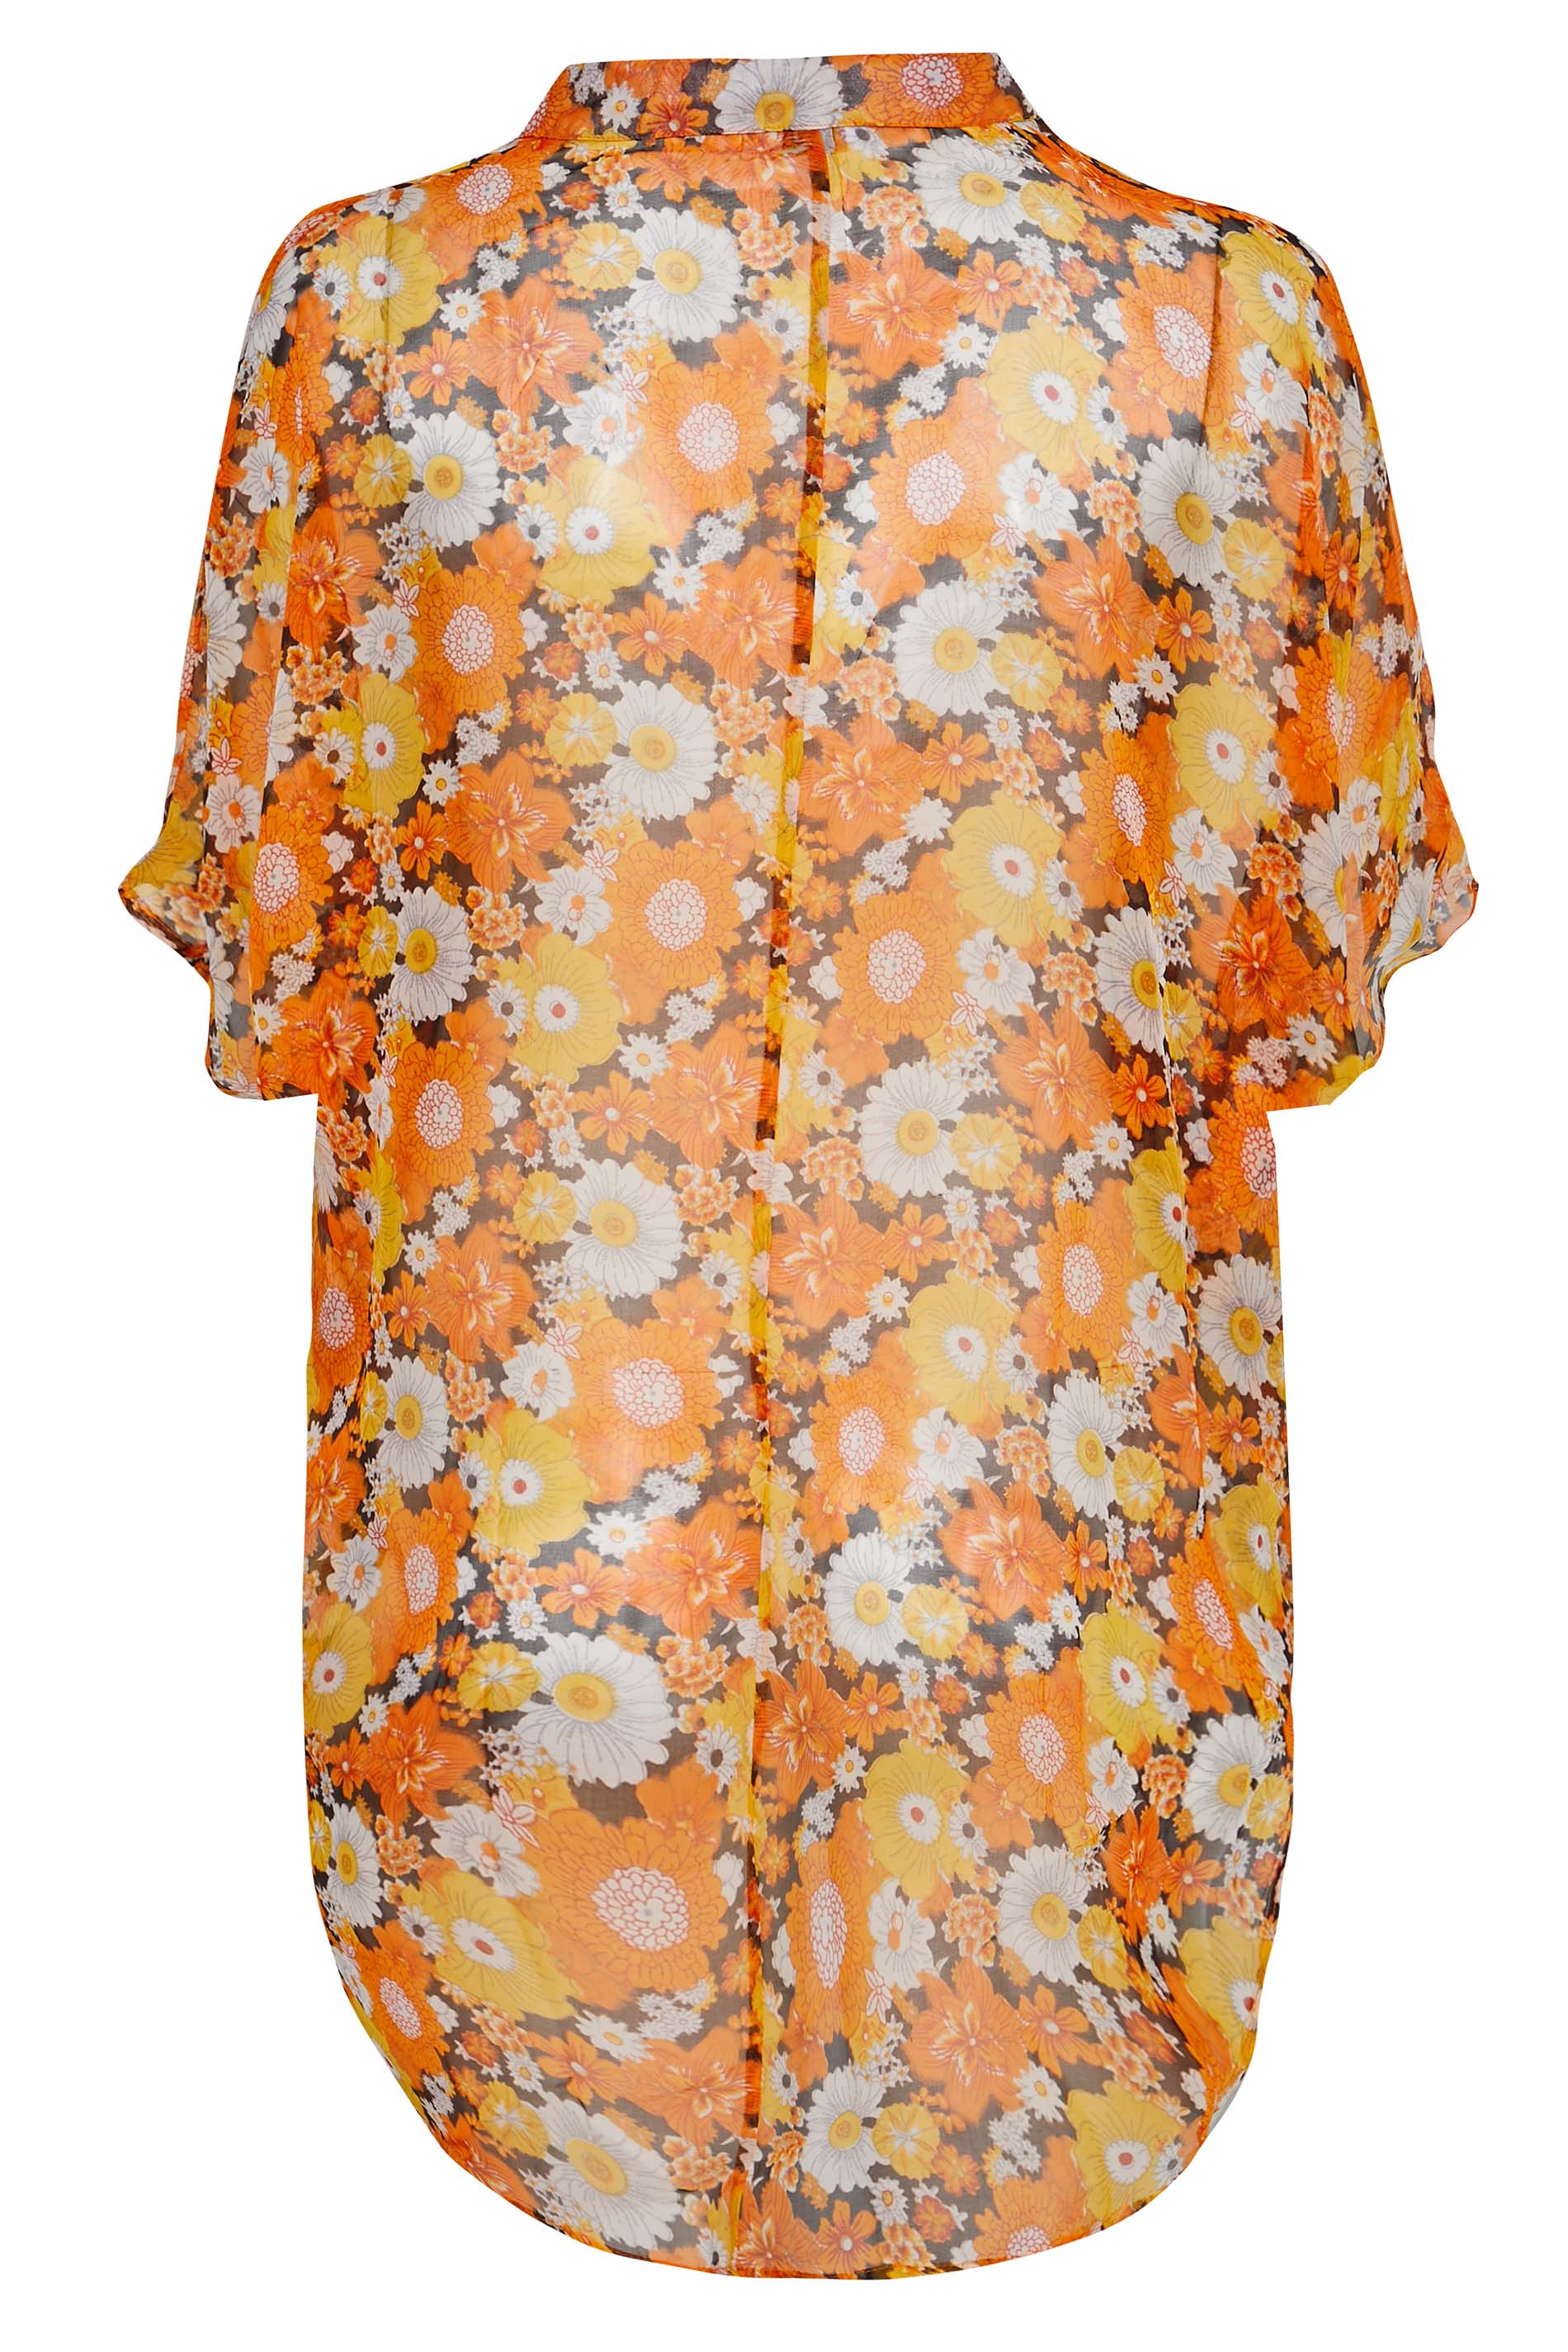 Grande taille  Blouses & Chemisiers Grande taille  Blouses | Curve Orange Floral Batwing Blouse - IE94342